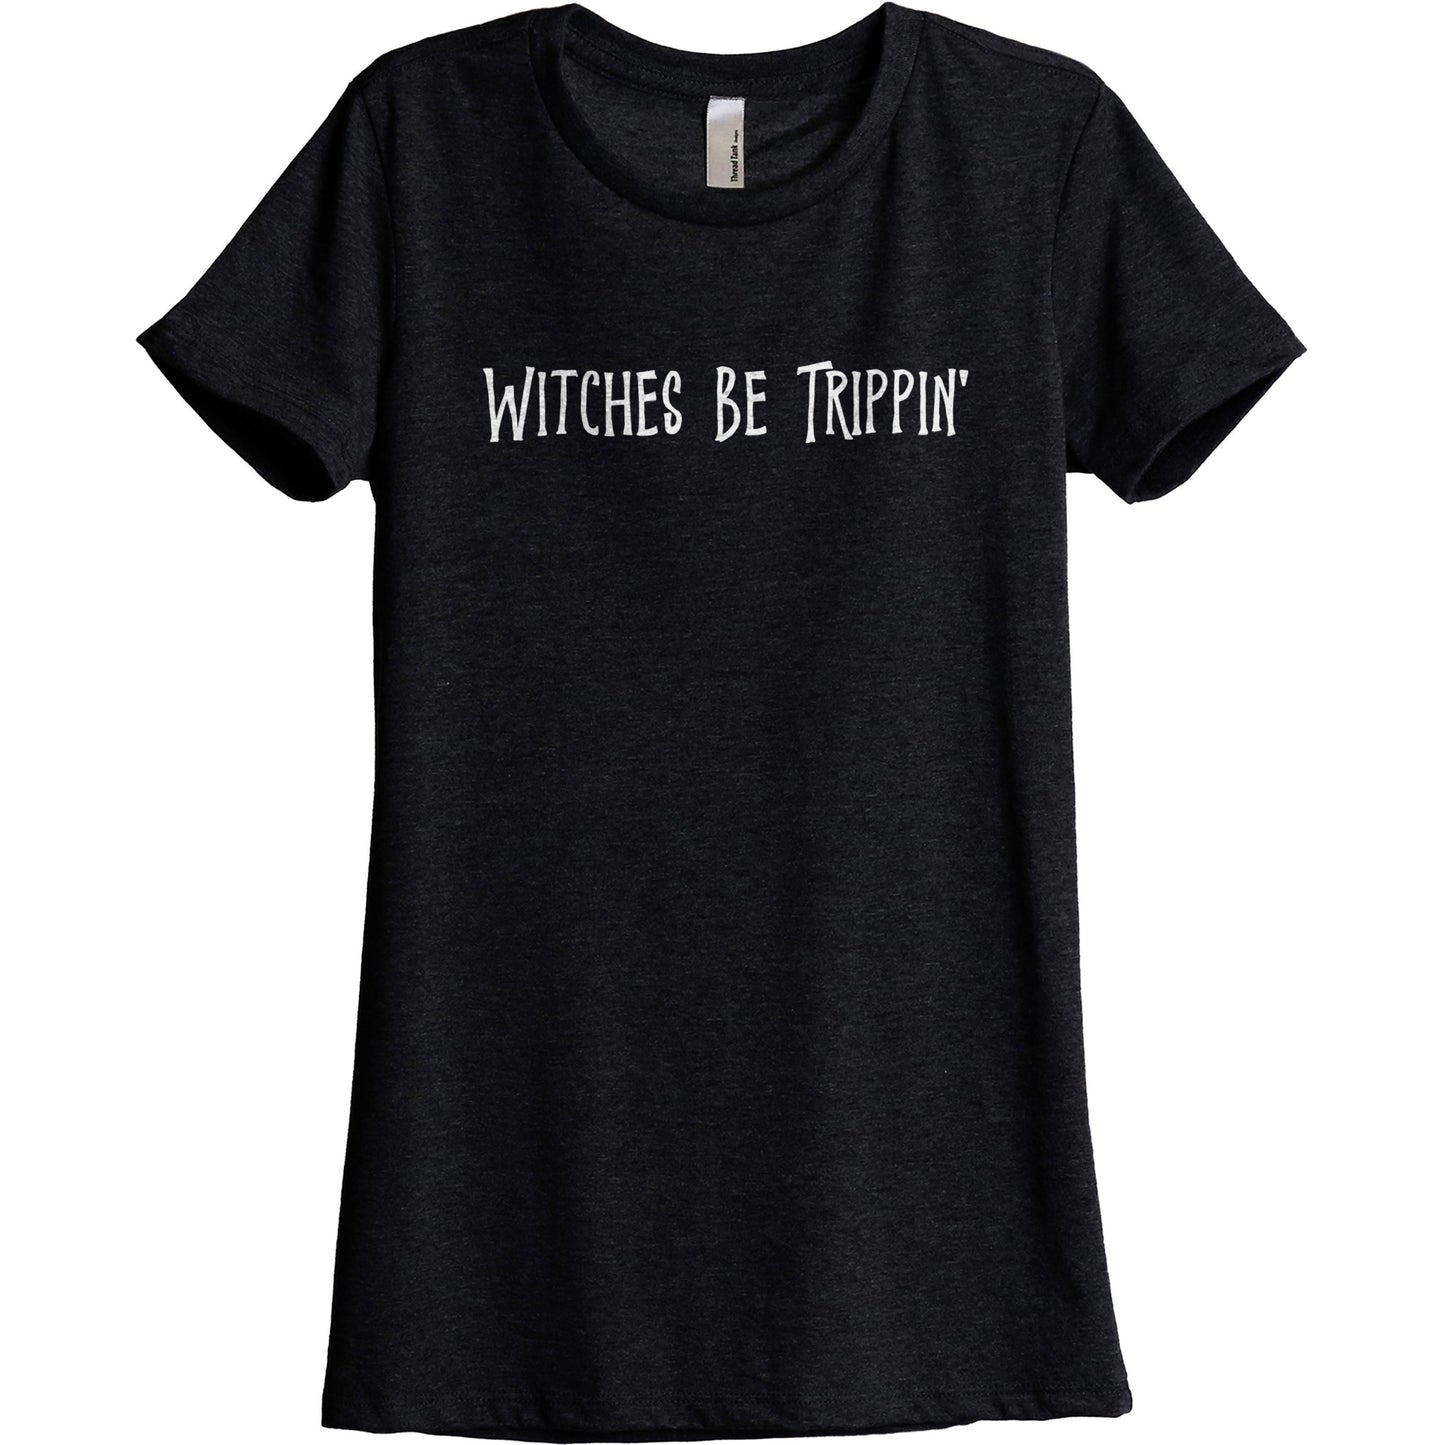 Witches Be Trippin' - Stories You Can Wear